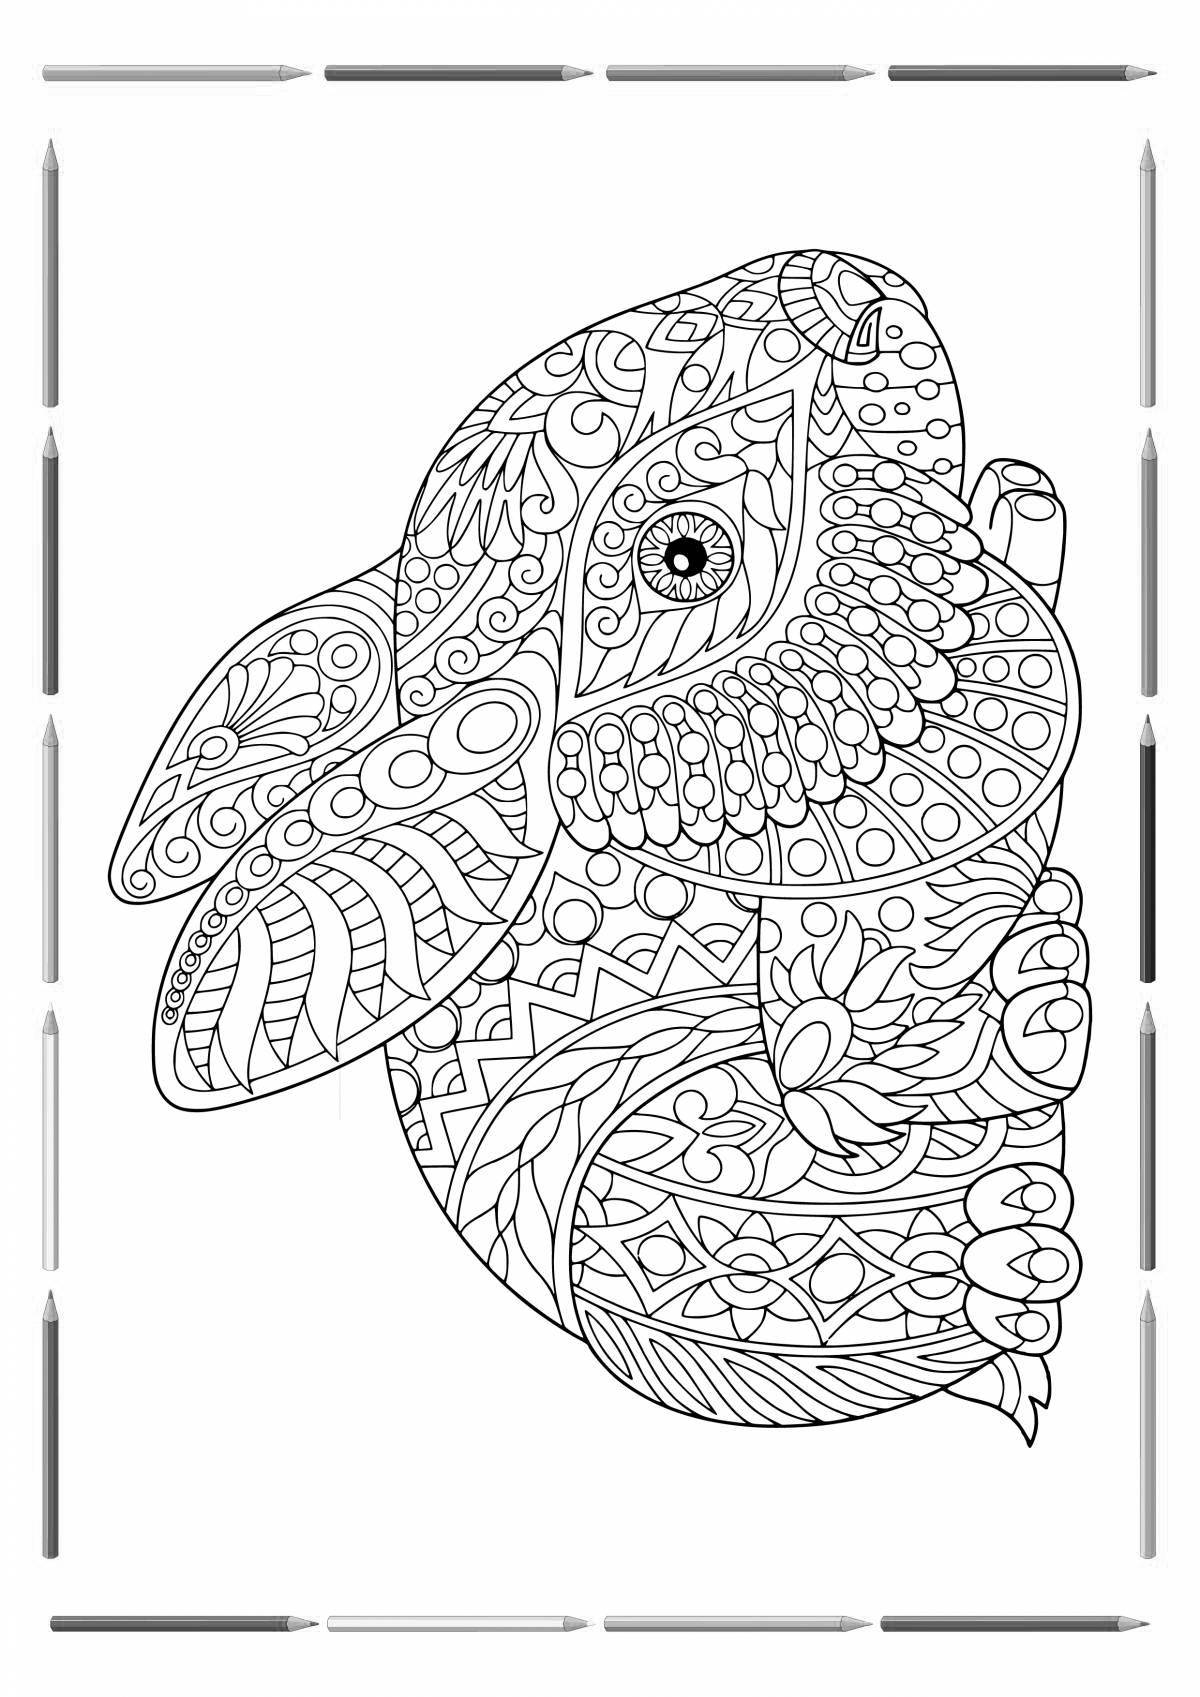 Soothing anti-stress coloring book for children 7 years old